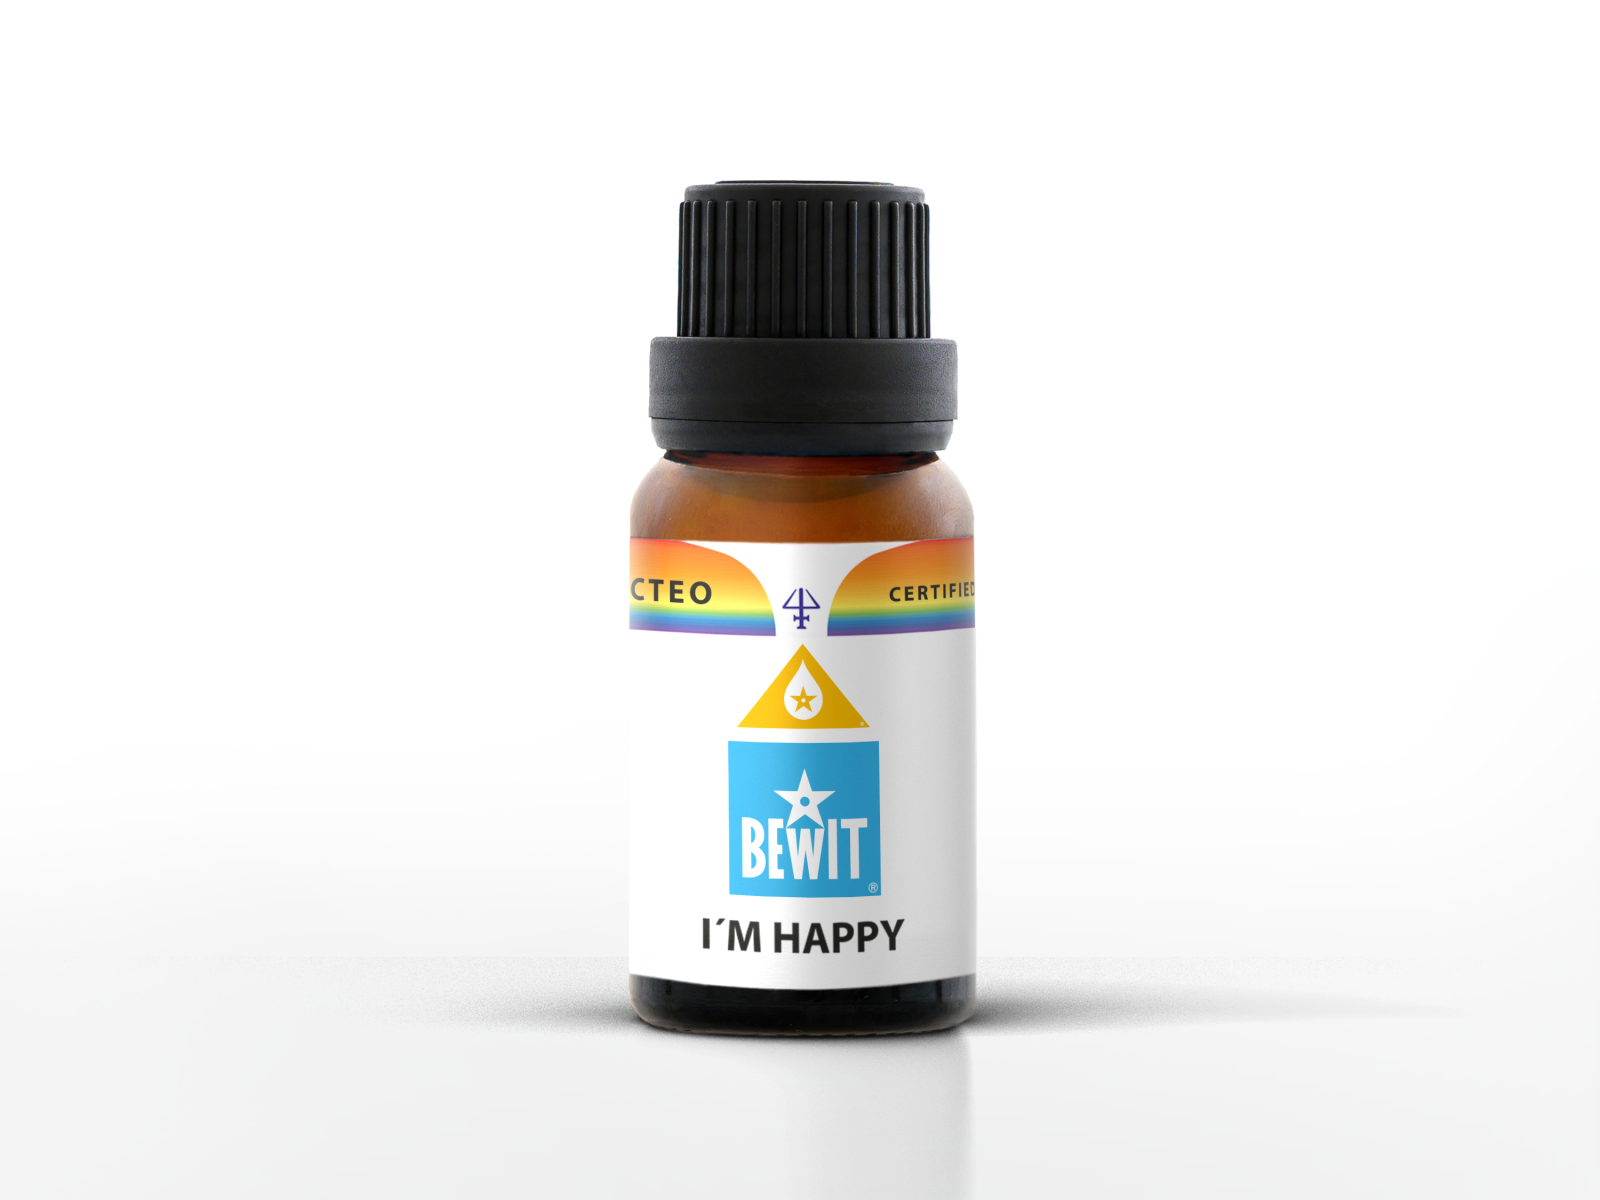 BEWIT I'M HAPPY - Blend of the essential oils, 15 ml